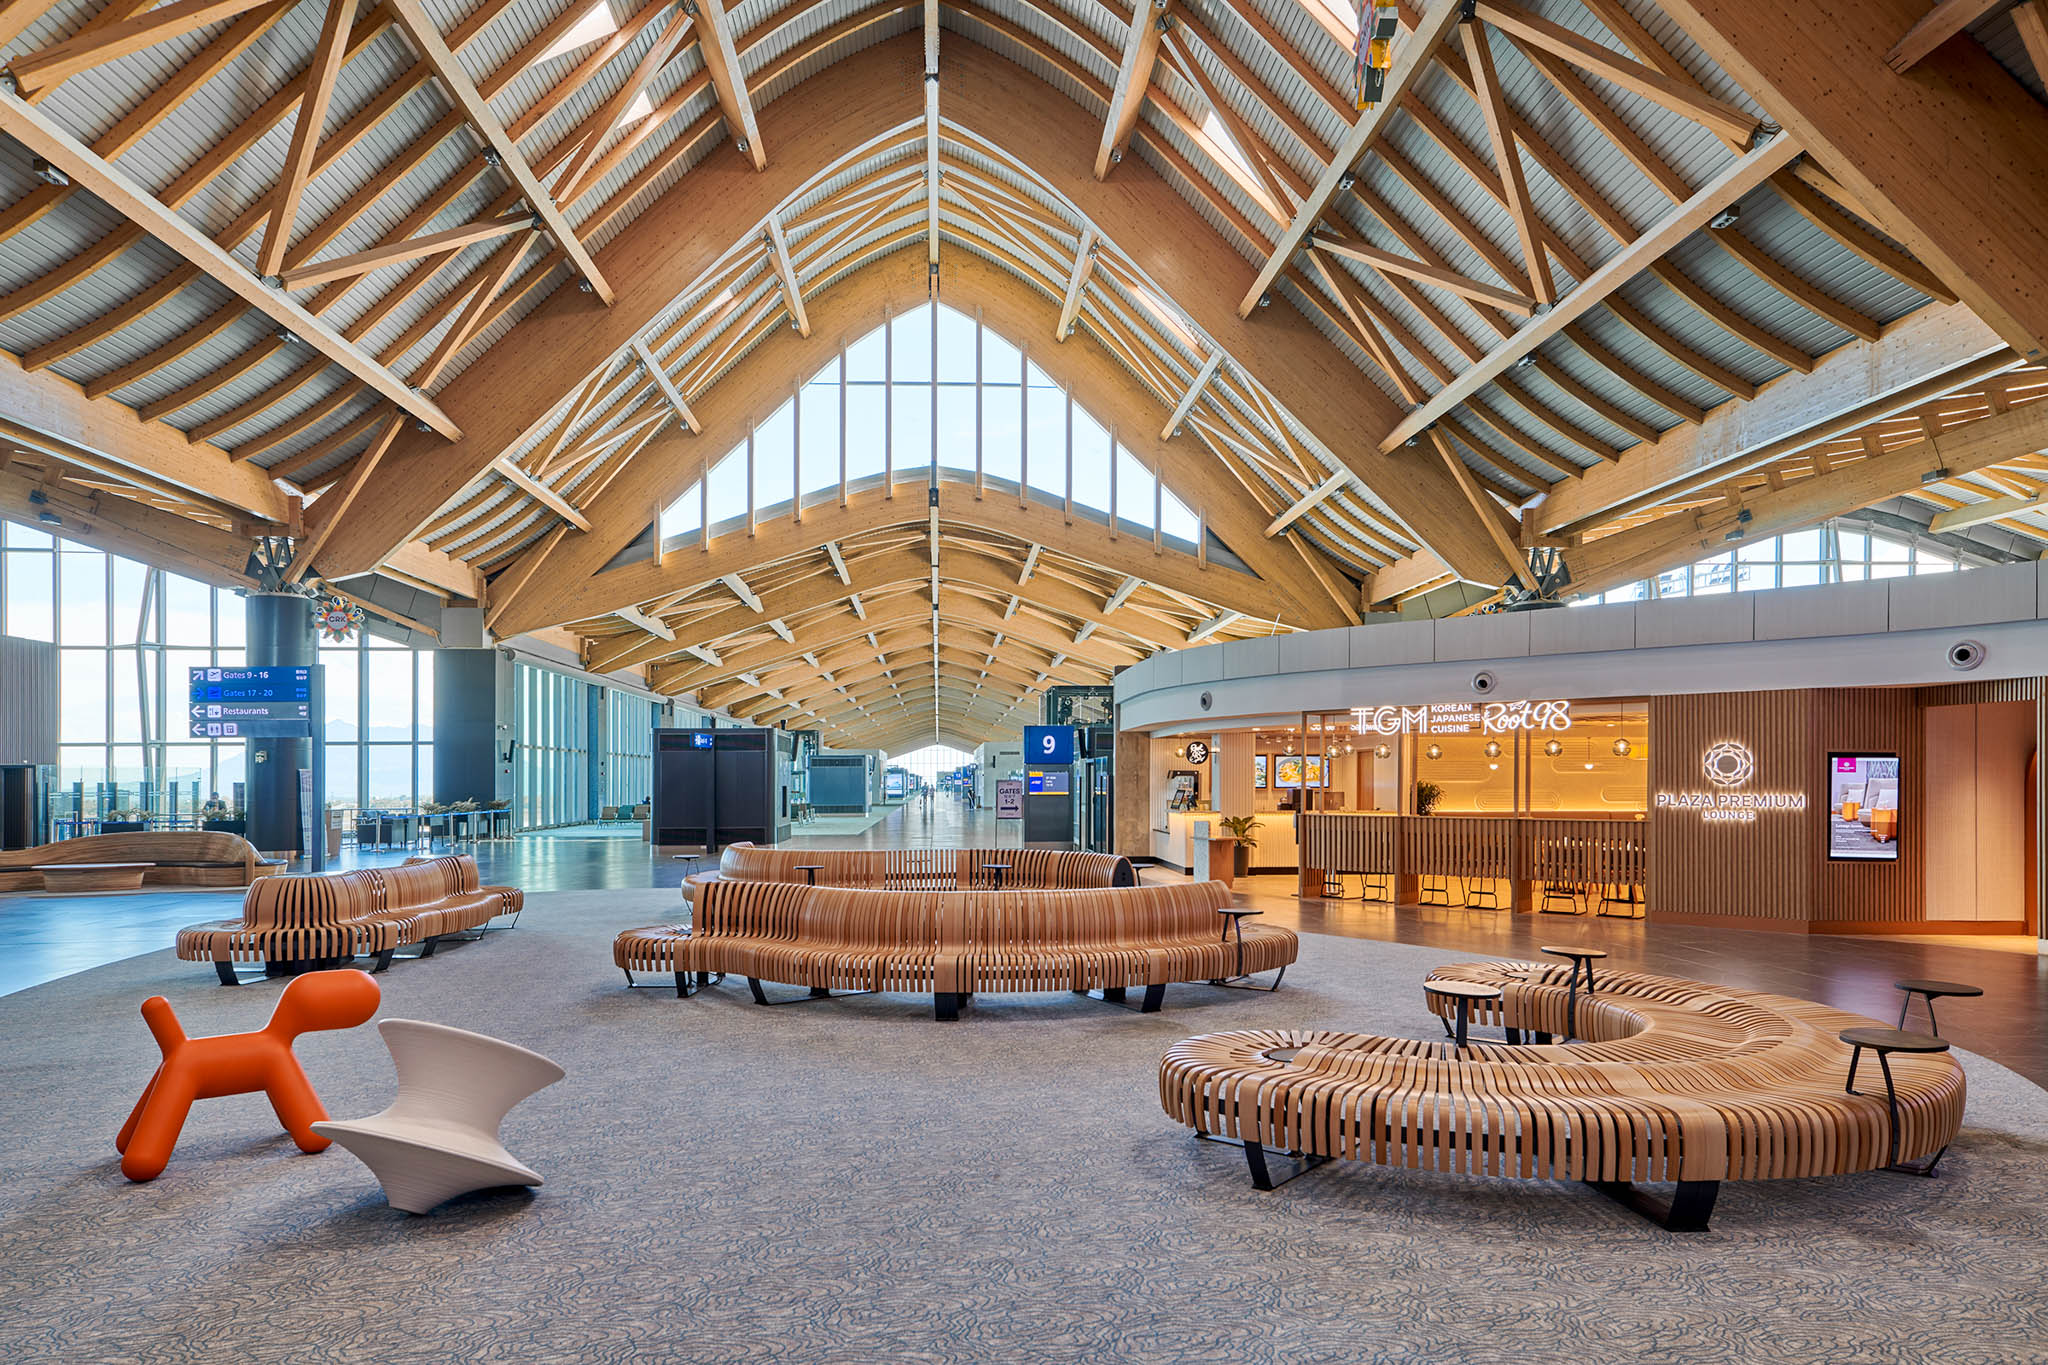 Clark Airport's commercial area with modern benches and beautiful ceiling treatment.